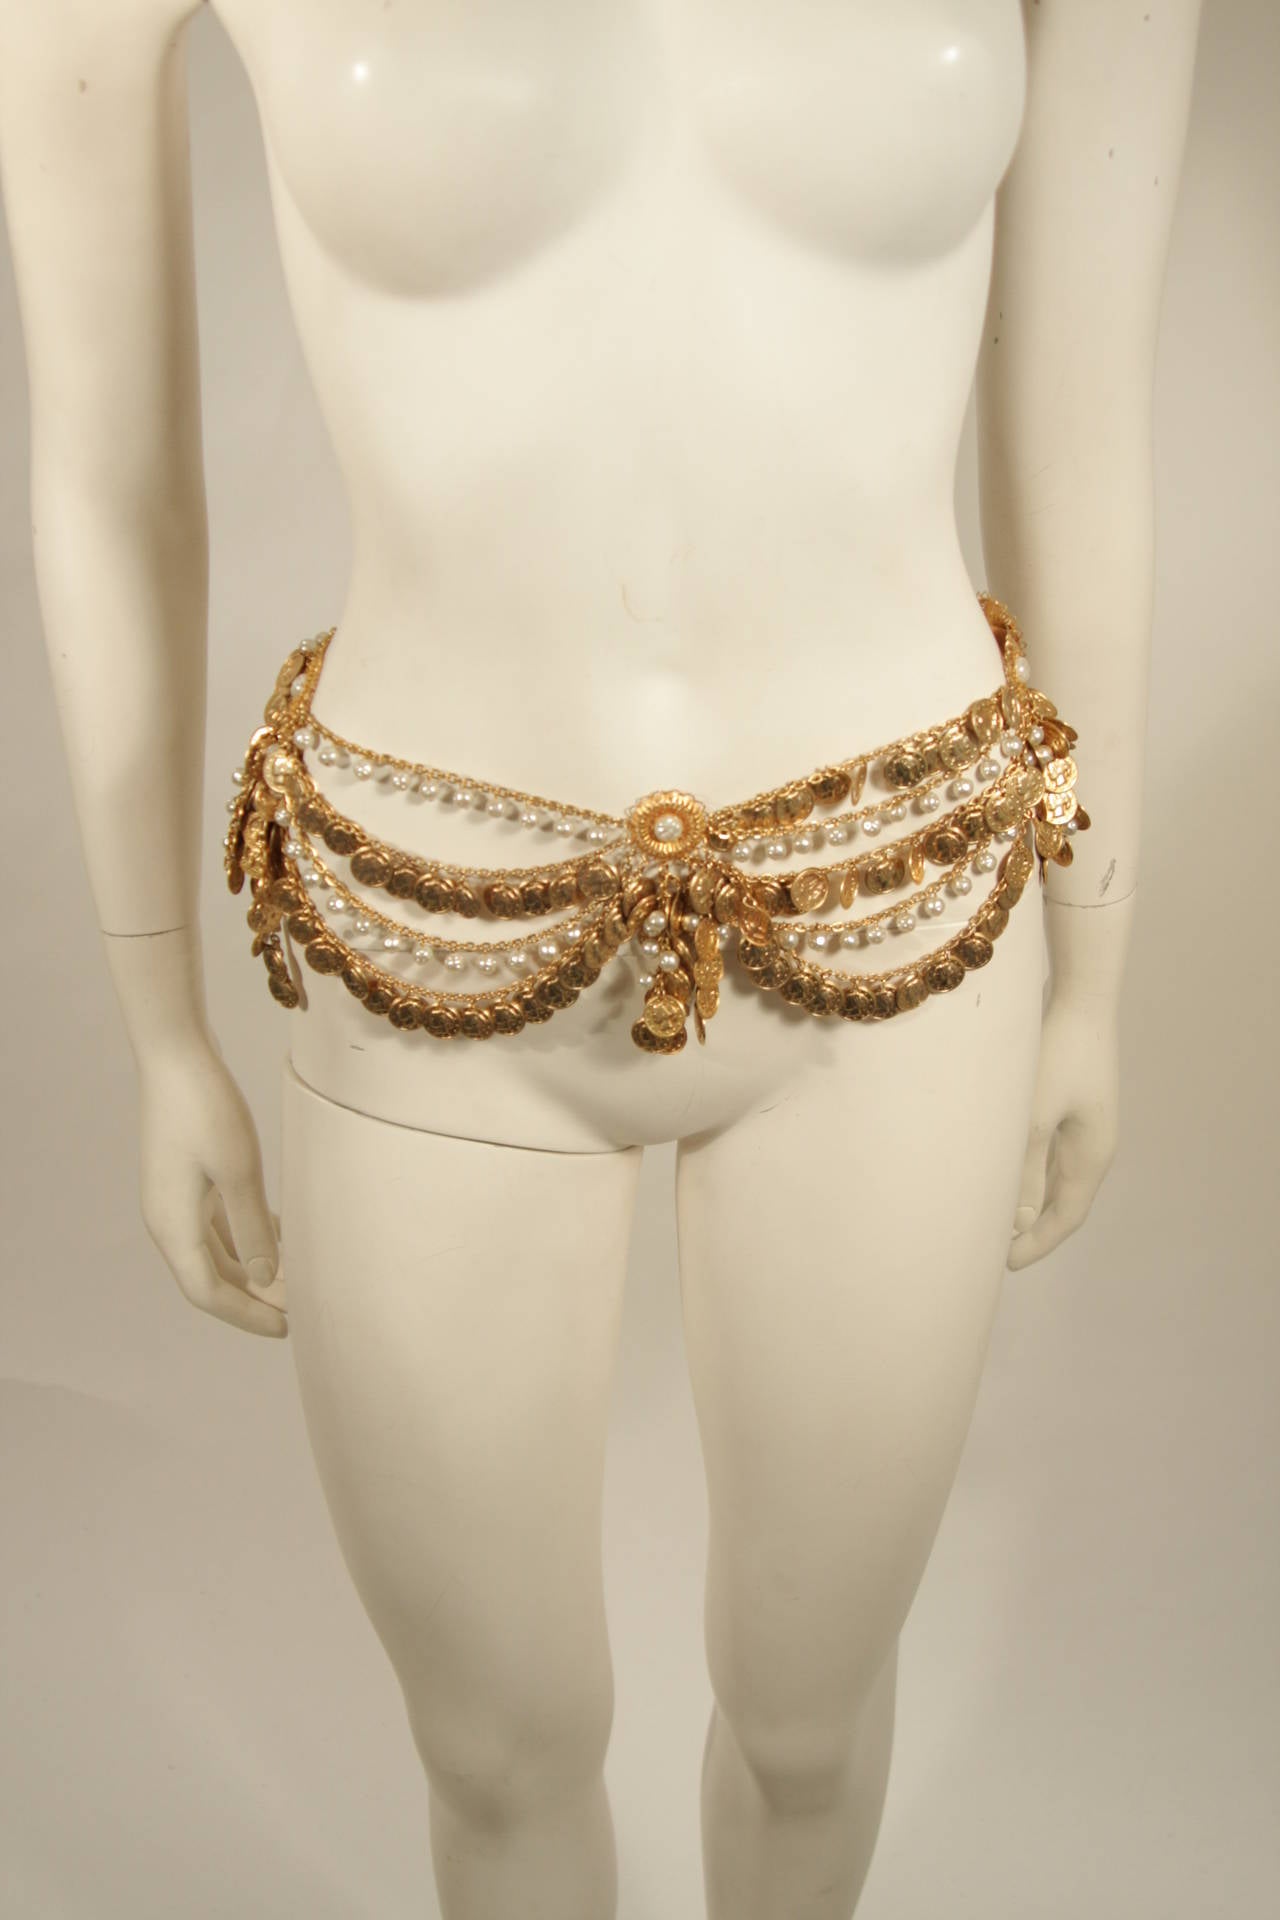 This Chrisitian Dior design is available for viewing at our Beverly Hills Boutique. The belt is a gold hue with gold coins and faux pearl adornments. Features a hook closure. Measures (approximately) 26.5